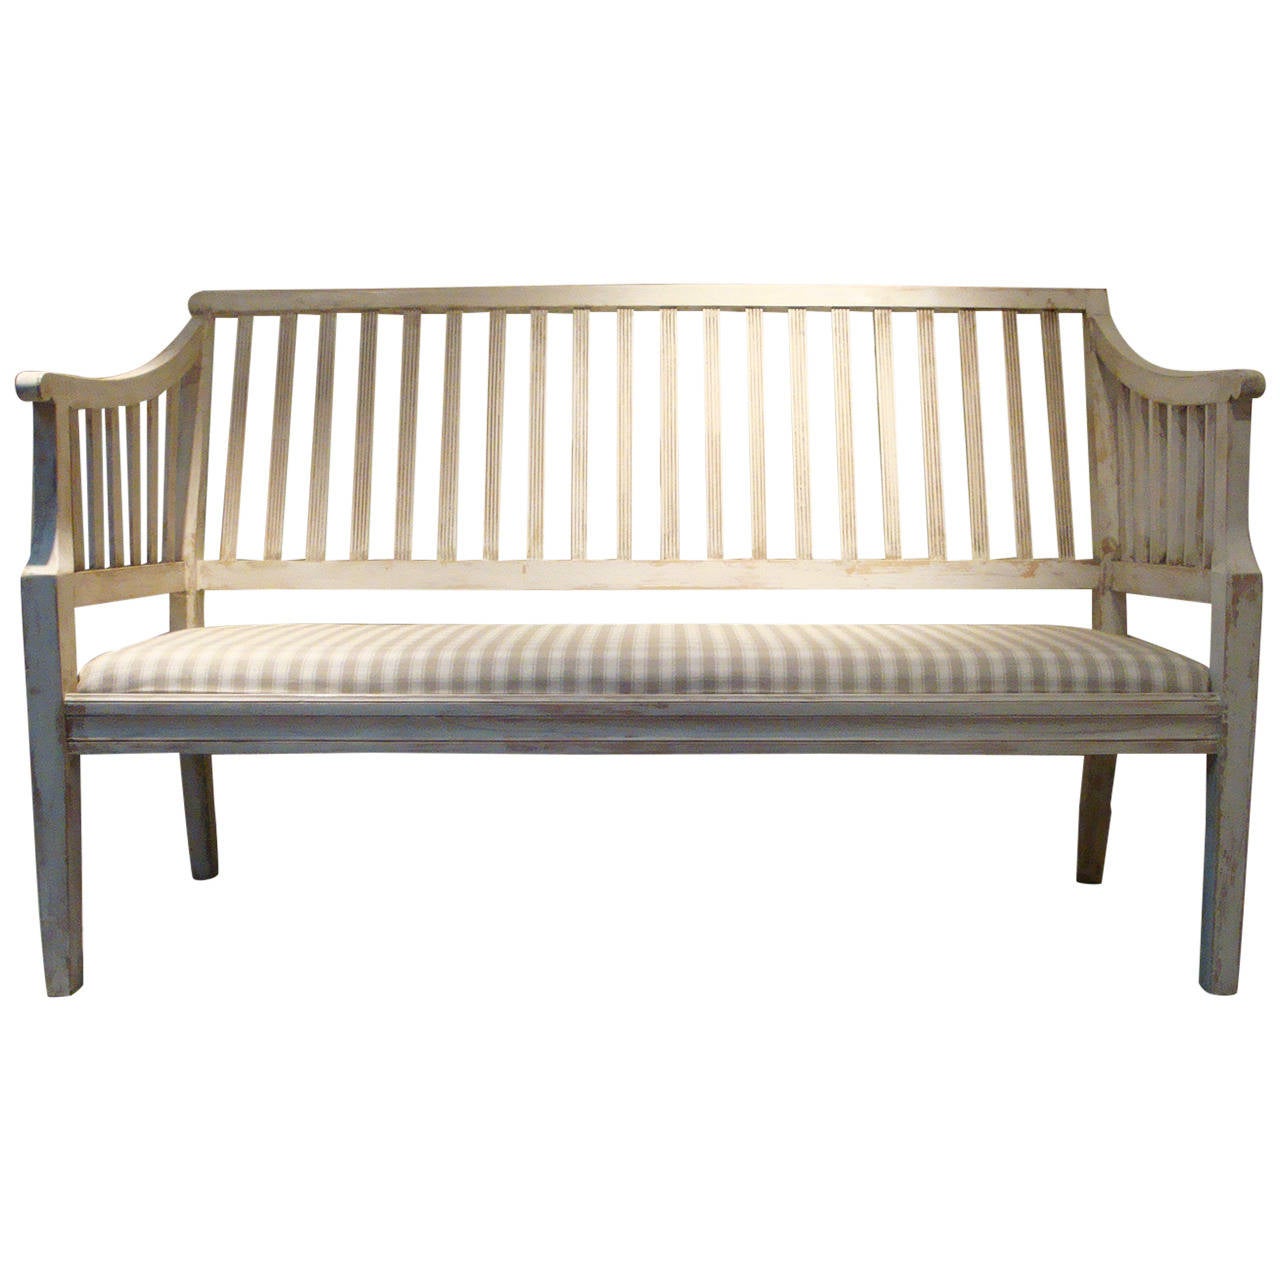 Early 20th Century Swedish Bench For Sale